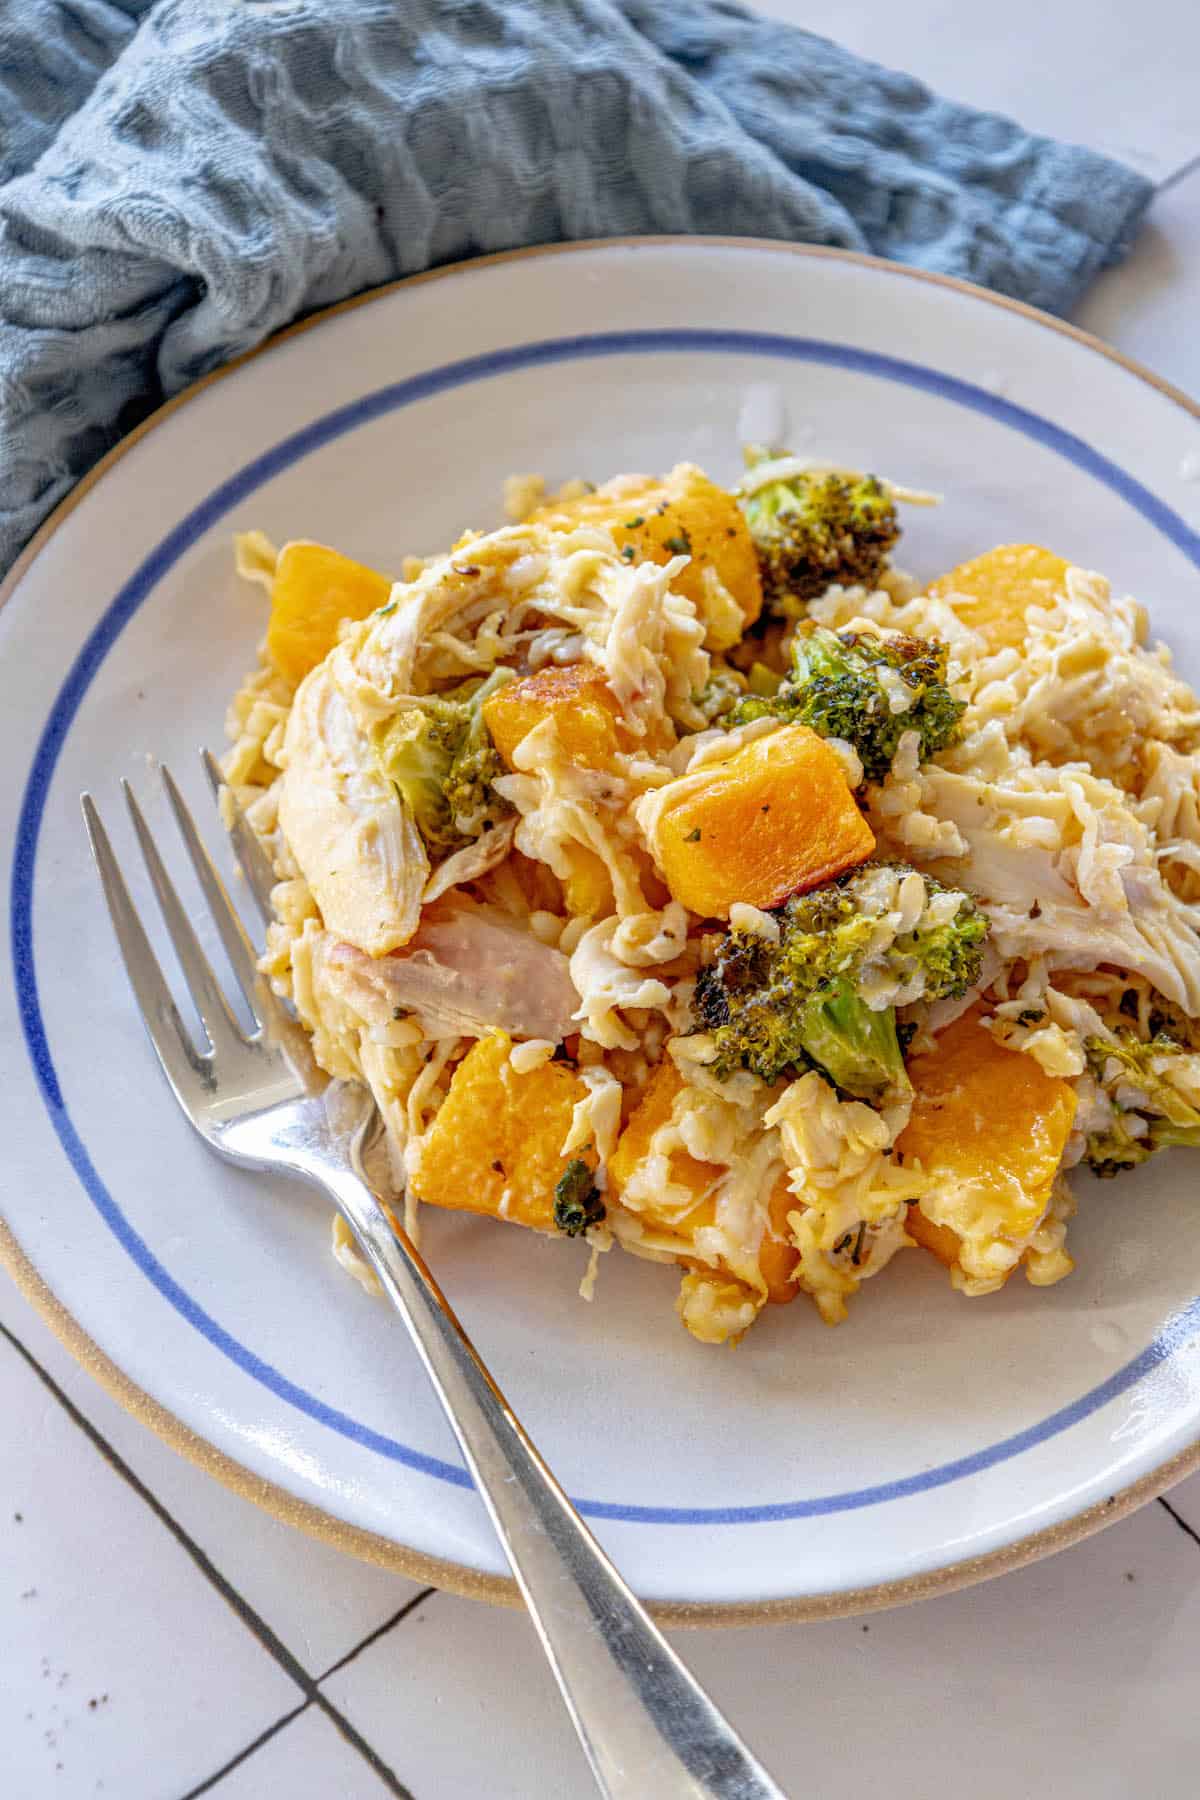 A plate with chicken, broccoli and rice on it.